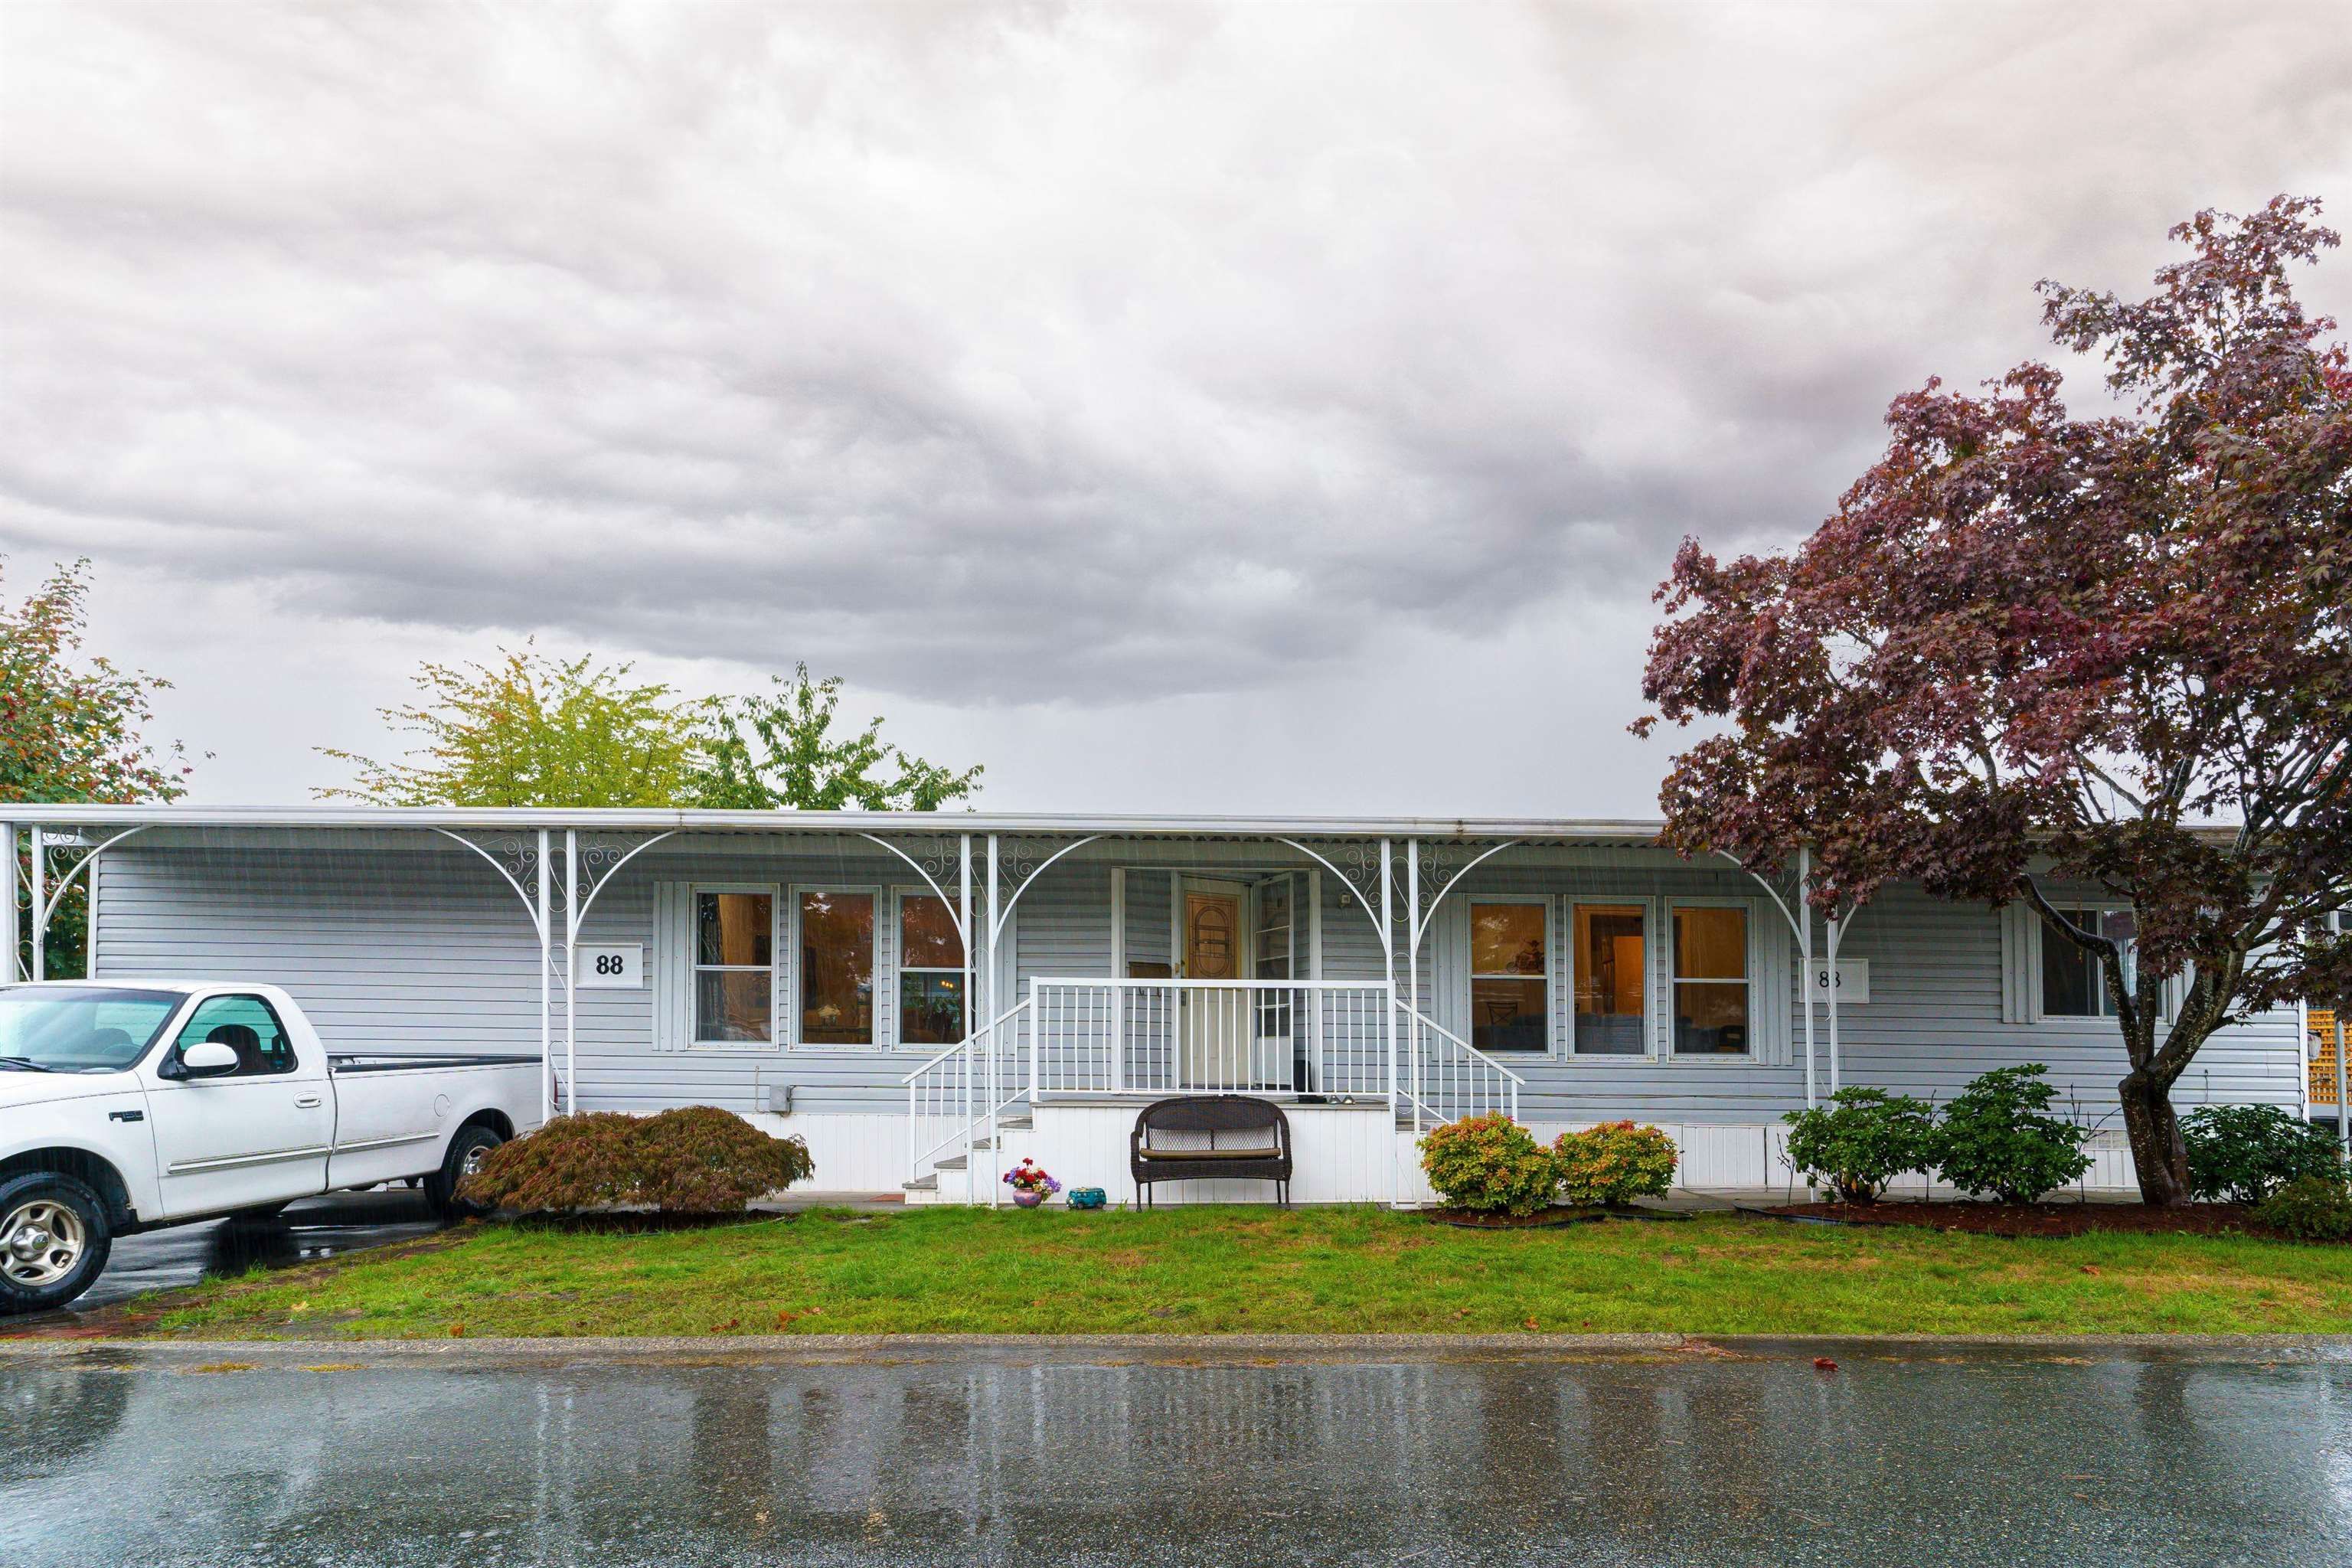 Main Photo: 88 145 KING EDWARD STREET in Coquitlam: Maillardville Manufactured Home for sale : MLS®# R2618875